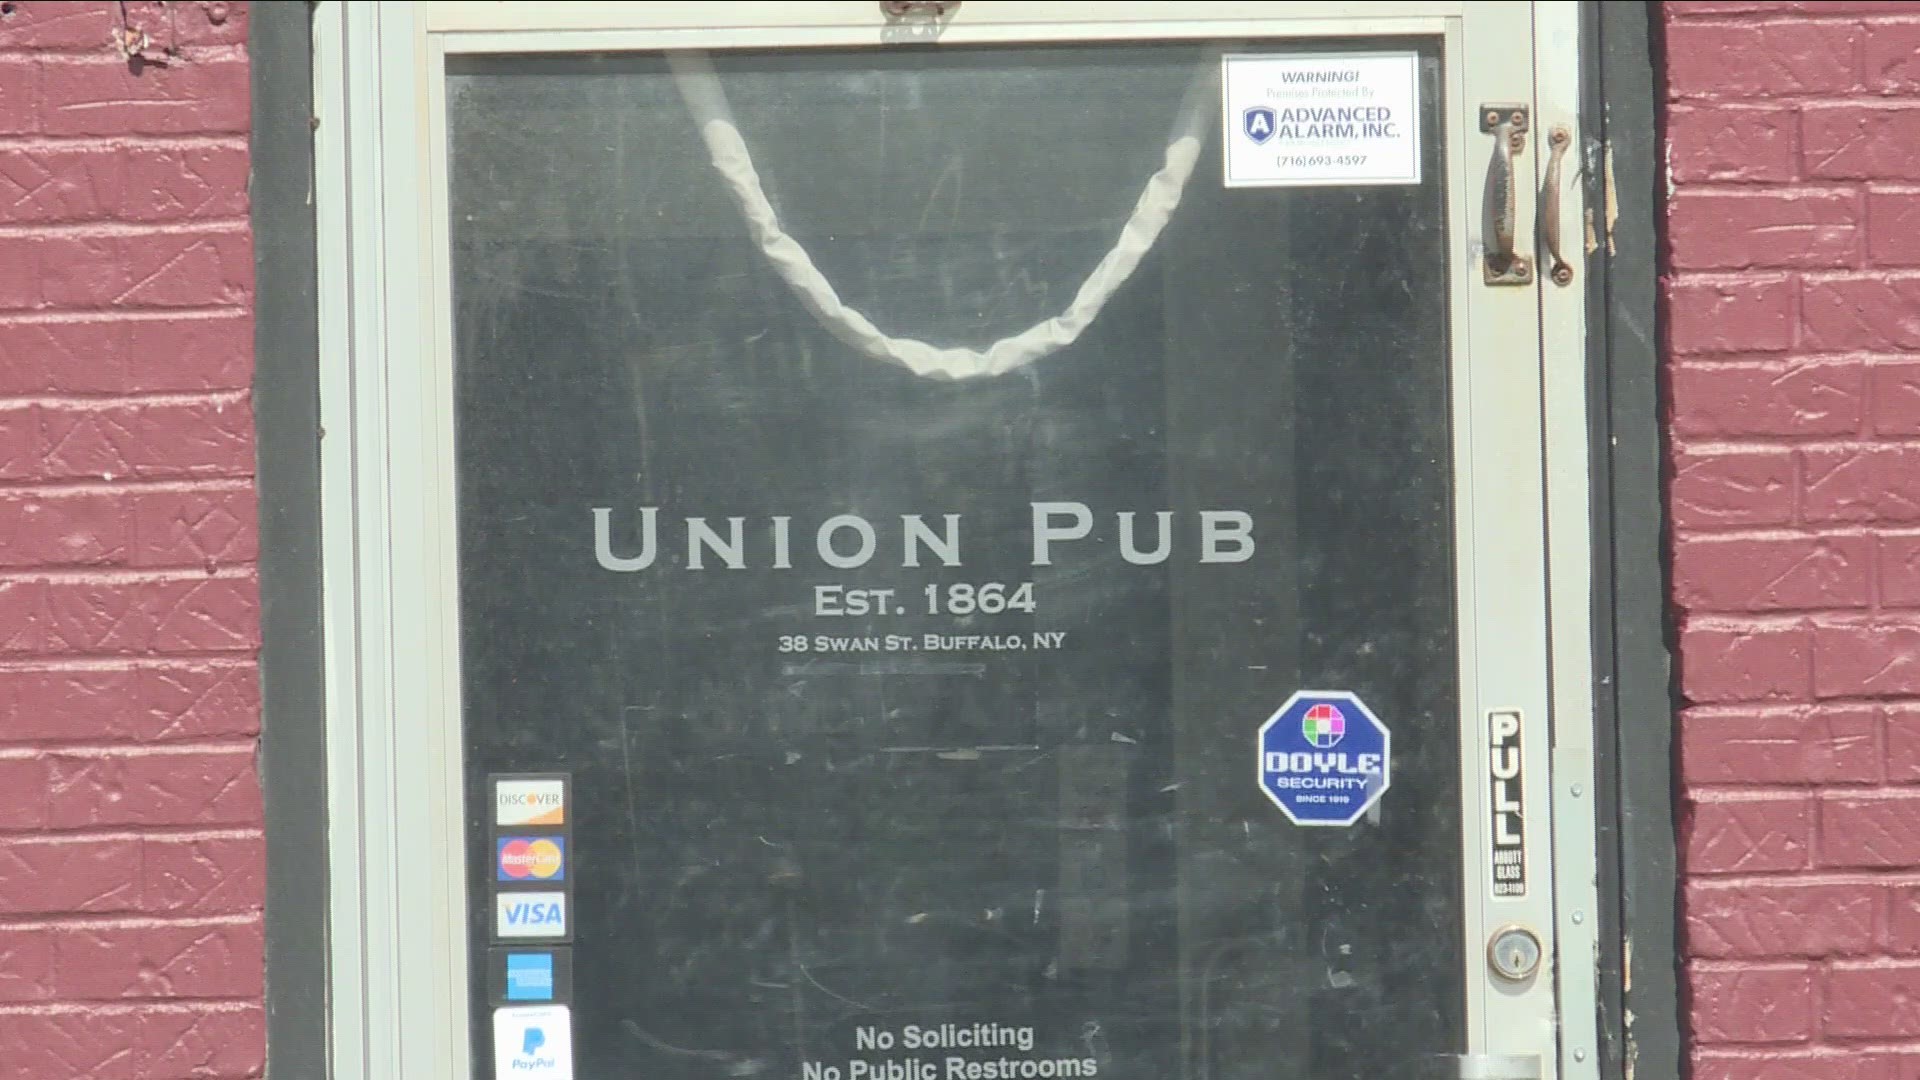 The Union Pub is moving to the Ellicott Square building on Main Street